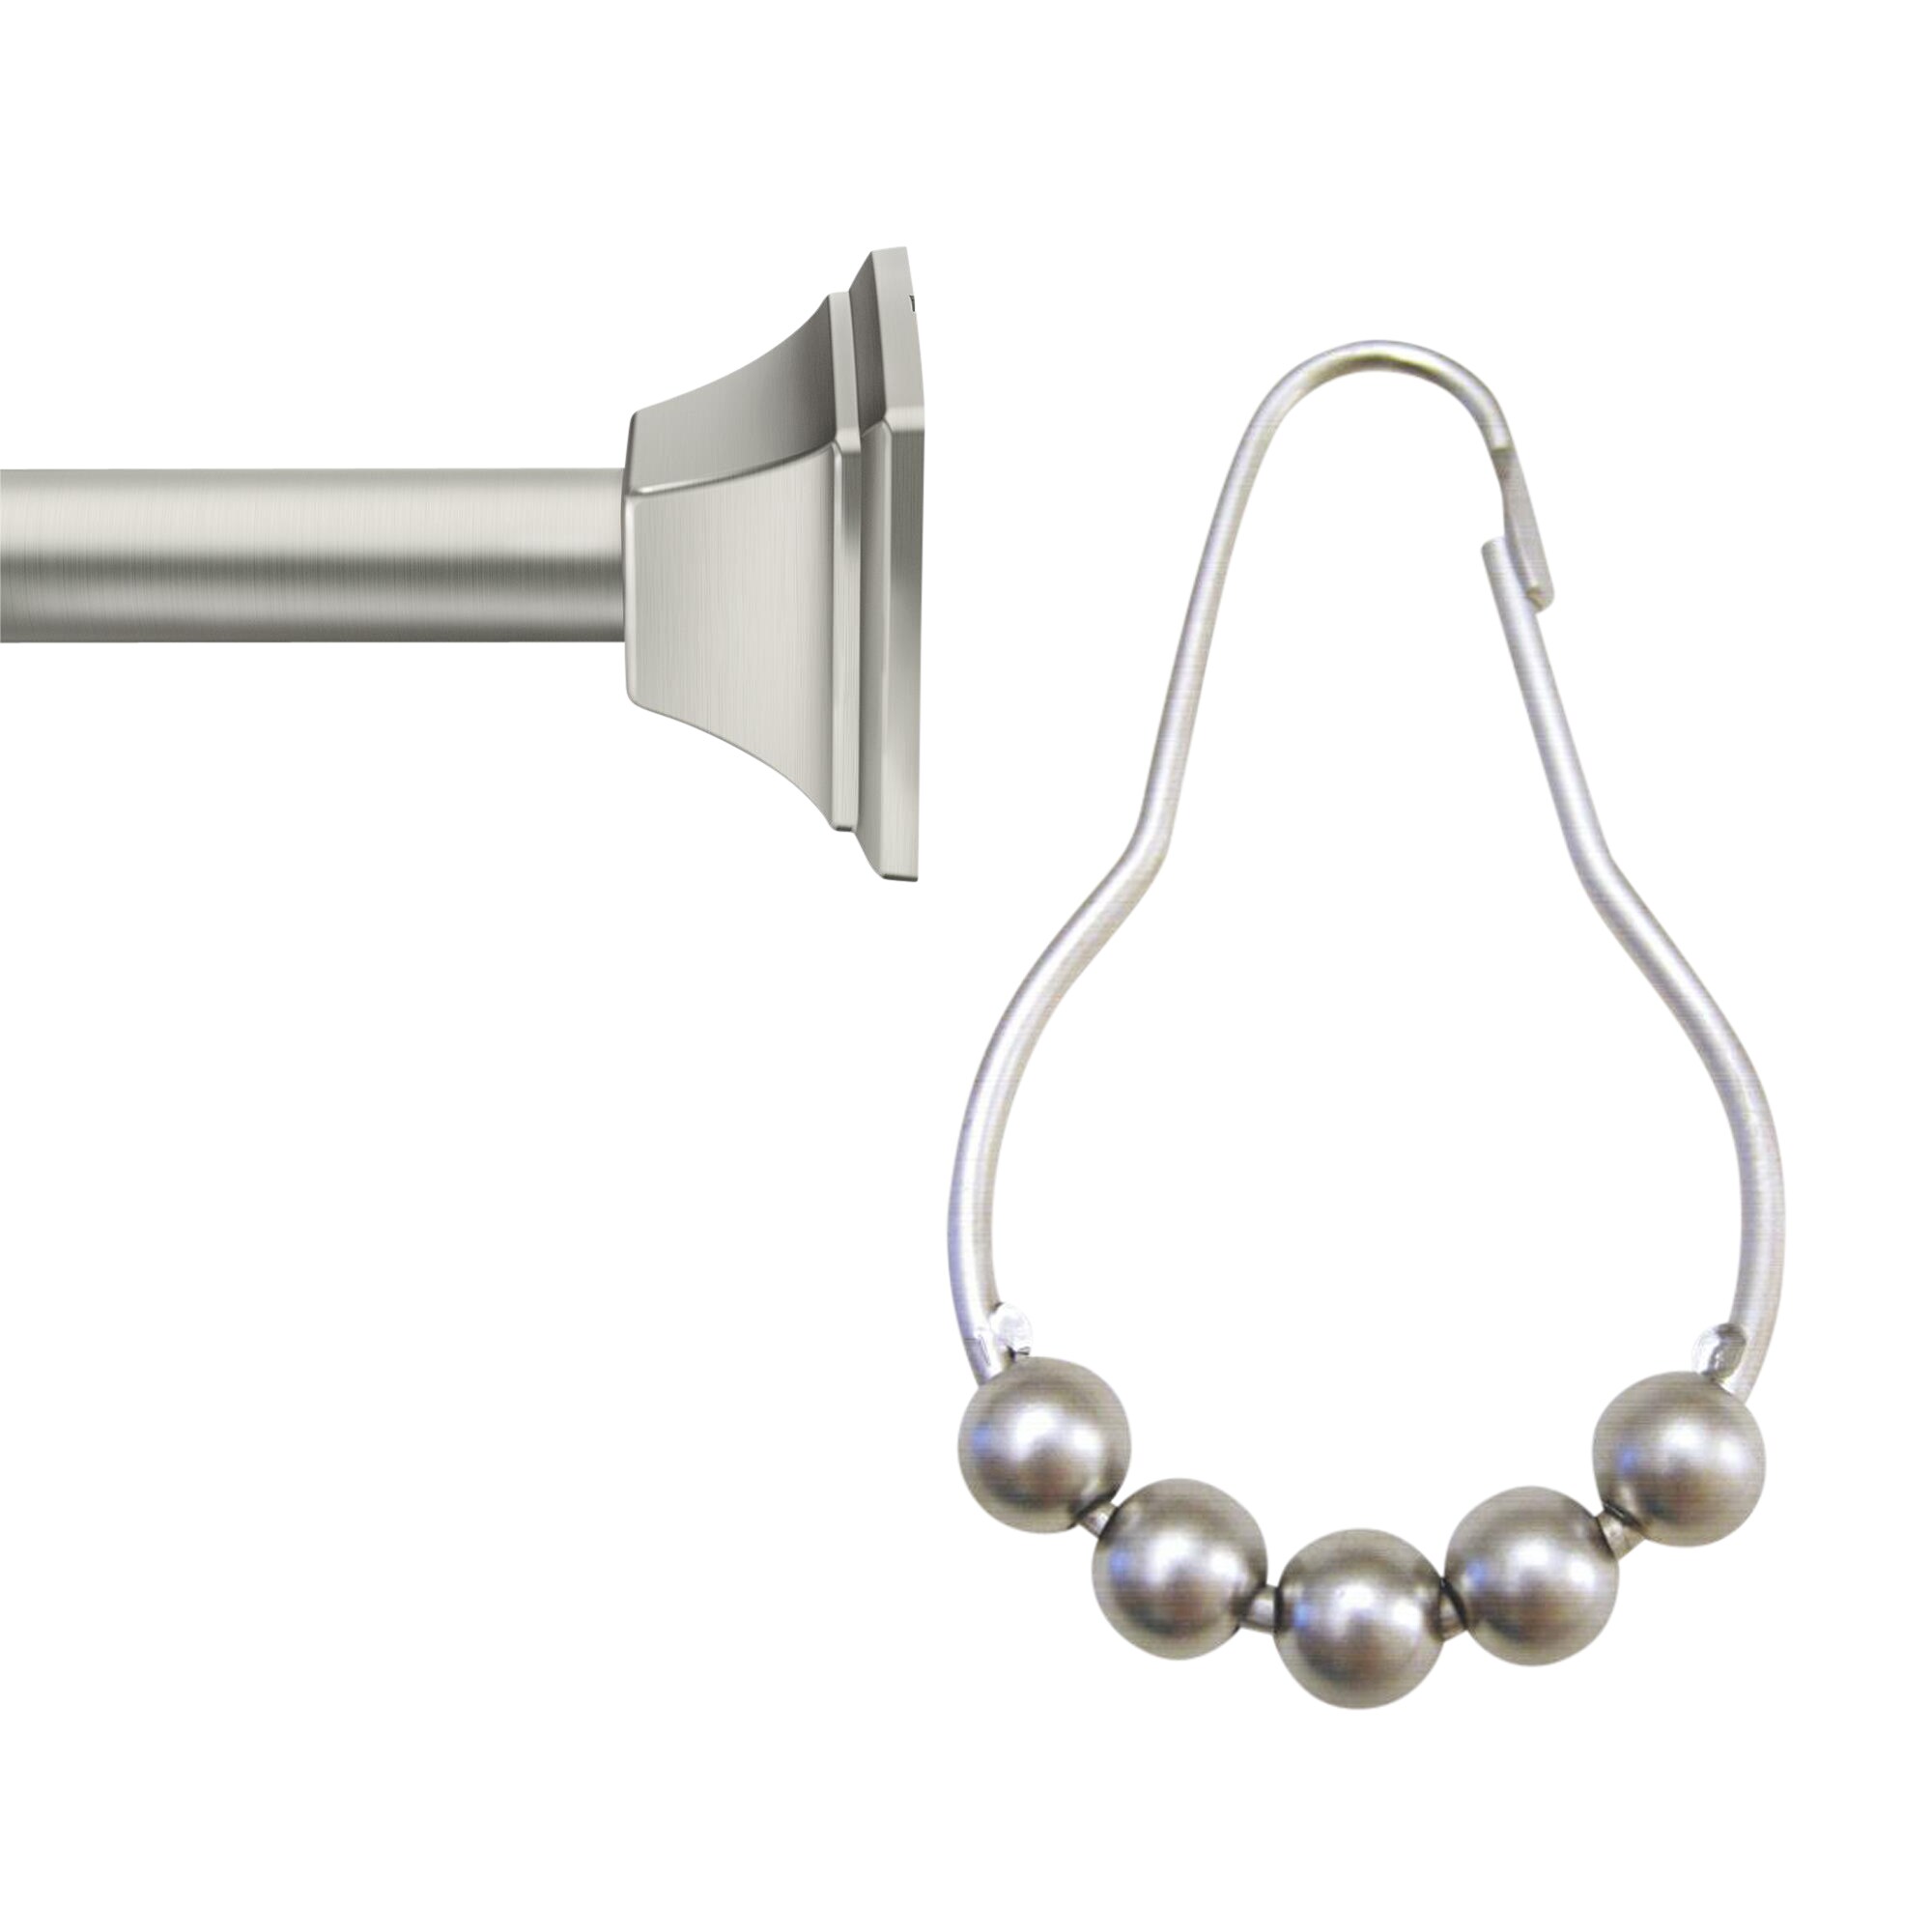 Moen 44-in to 72-in Brushed Nickel Tension Single Straight Shower Rod and Ring Set